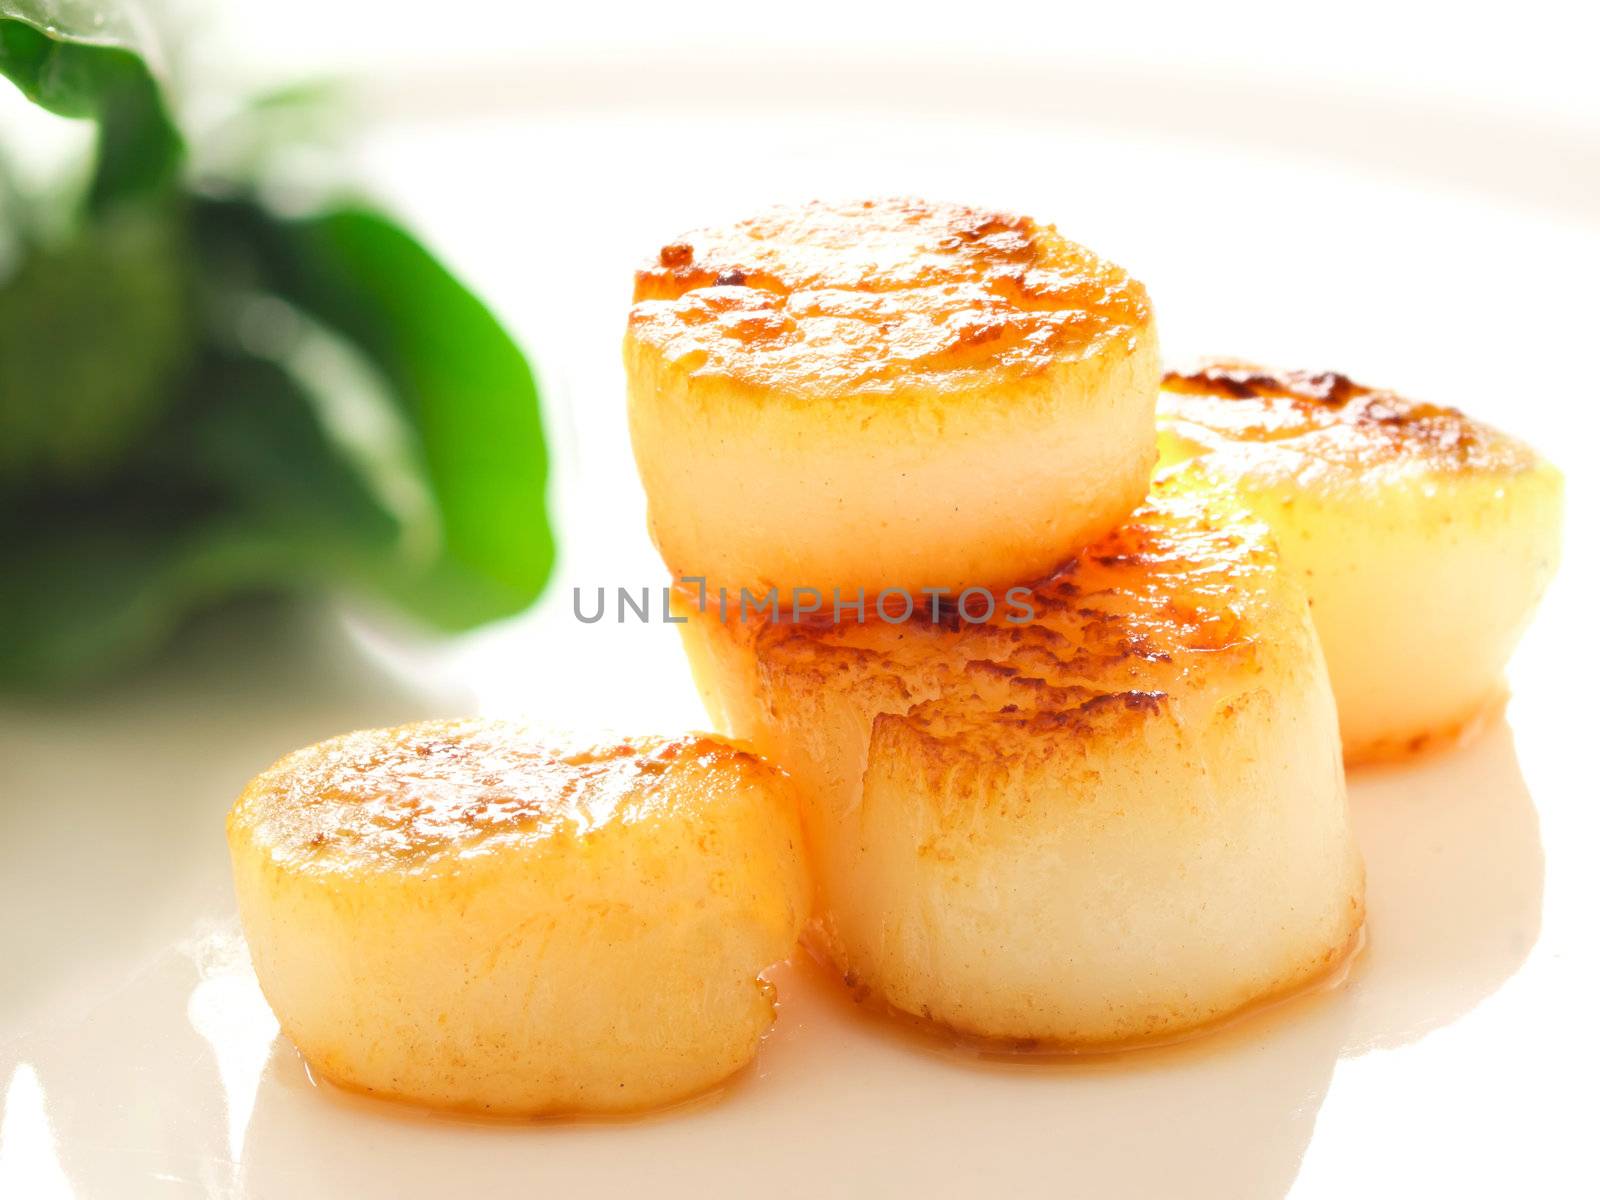 pan seared sea scallops by zkruger